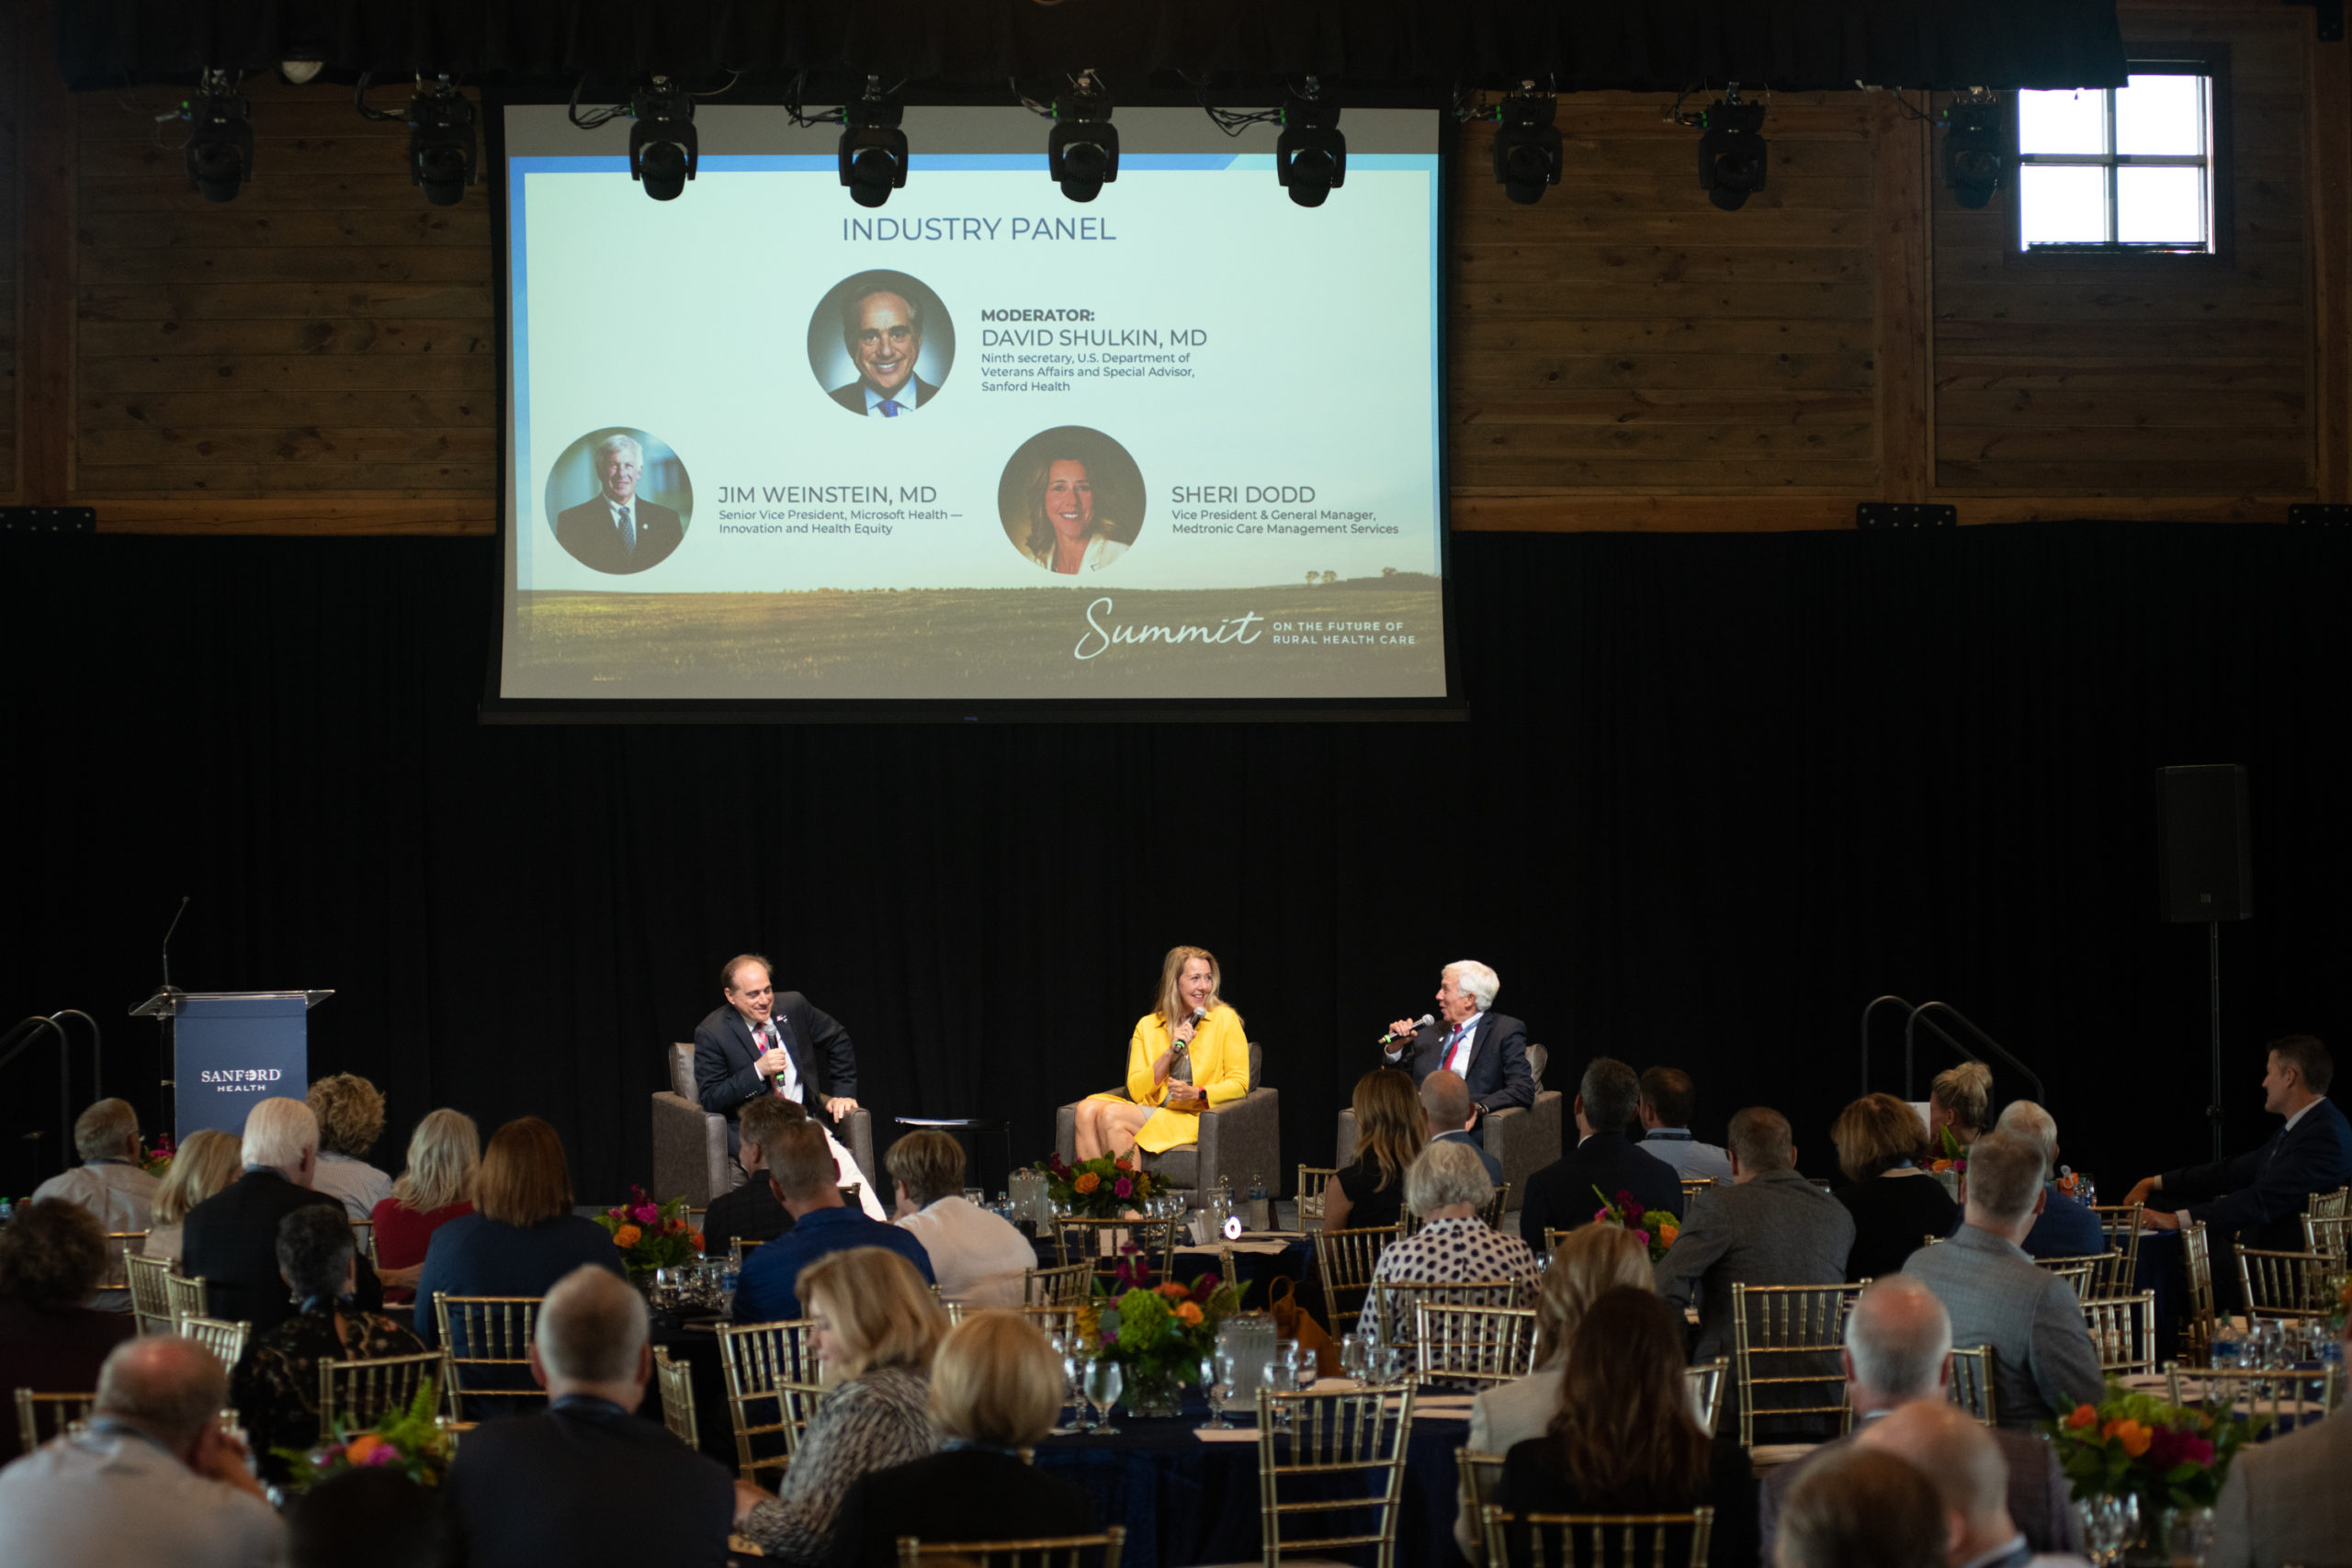 Three businesspeople sit onstage with their photos and titles on a screen above them as a crowd listens from tables in the foreground.